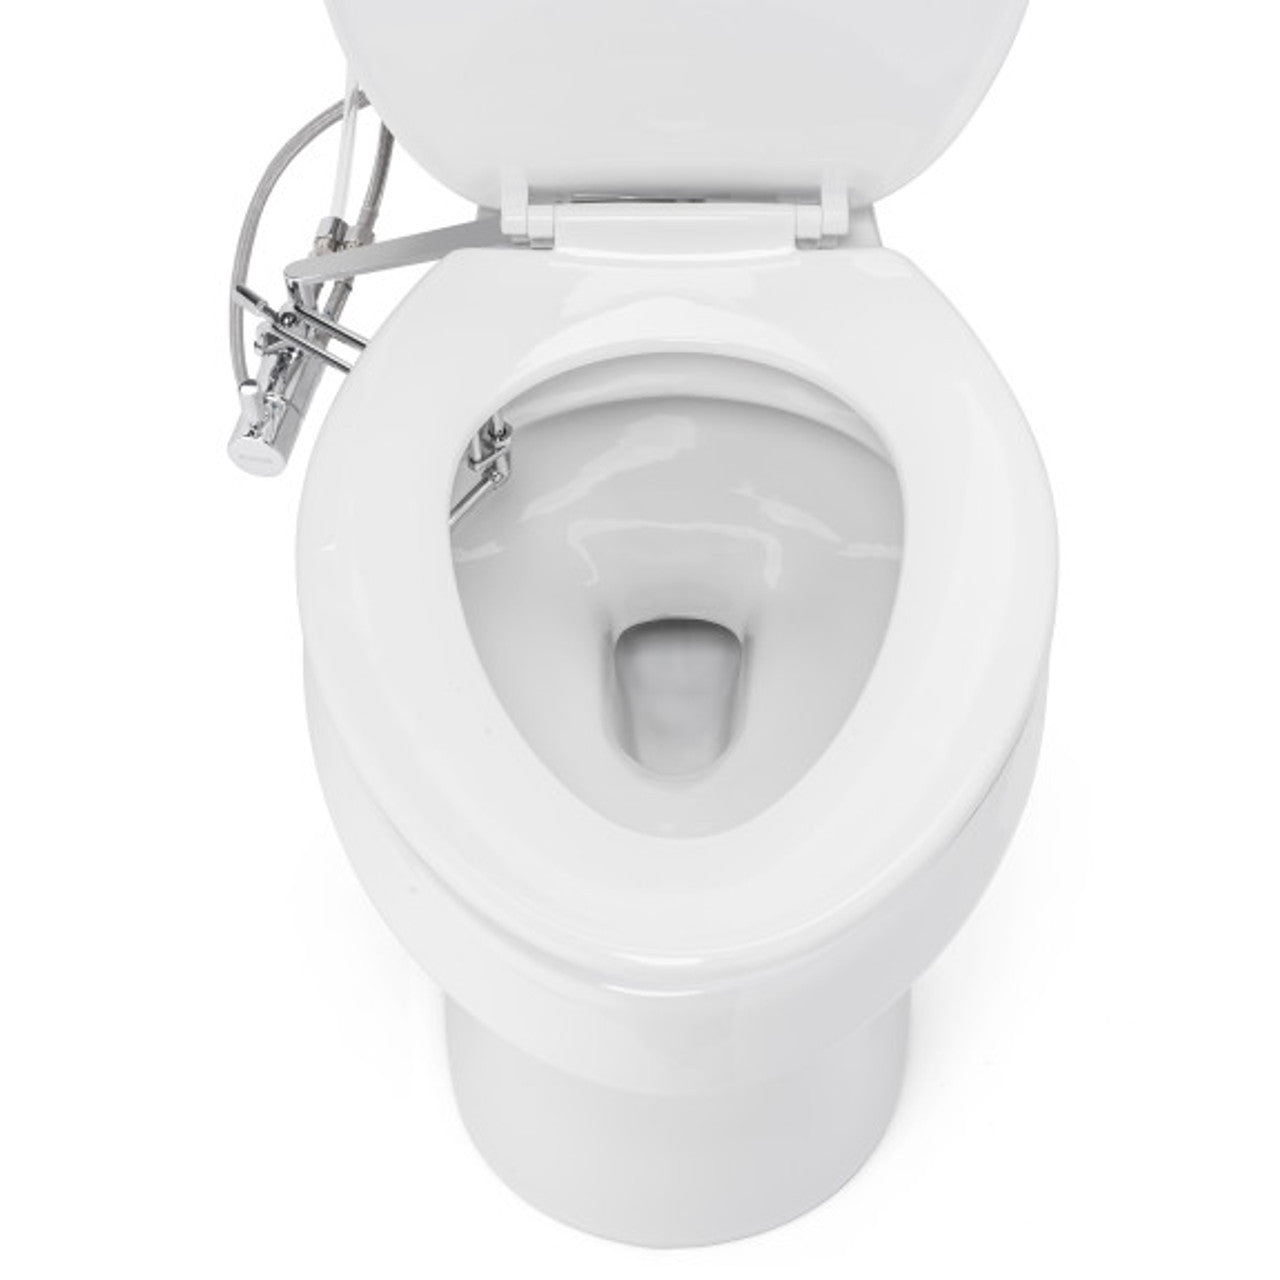 Side-Mounted Bidet Attachment with Adjustable Spray Wand, Dual Temperature